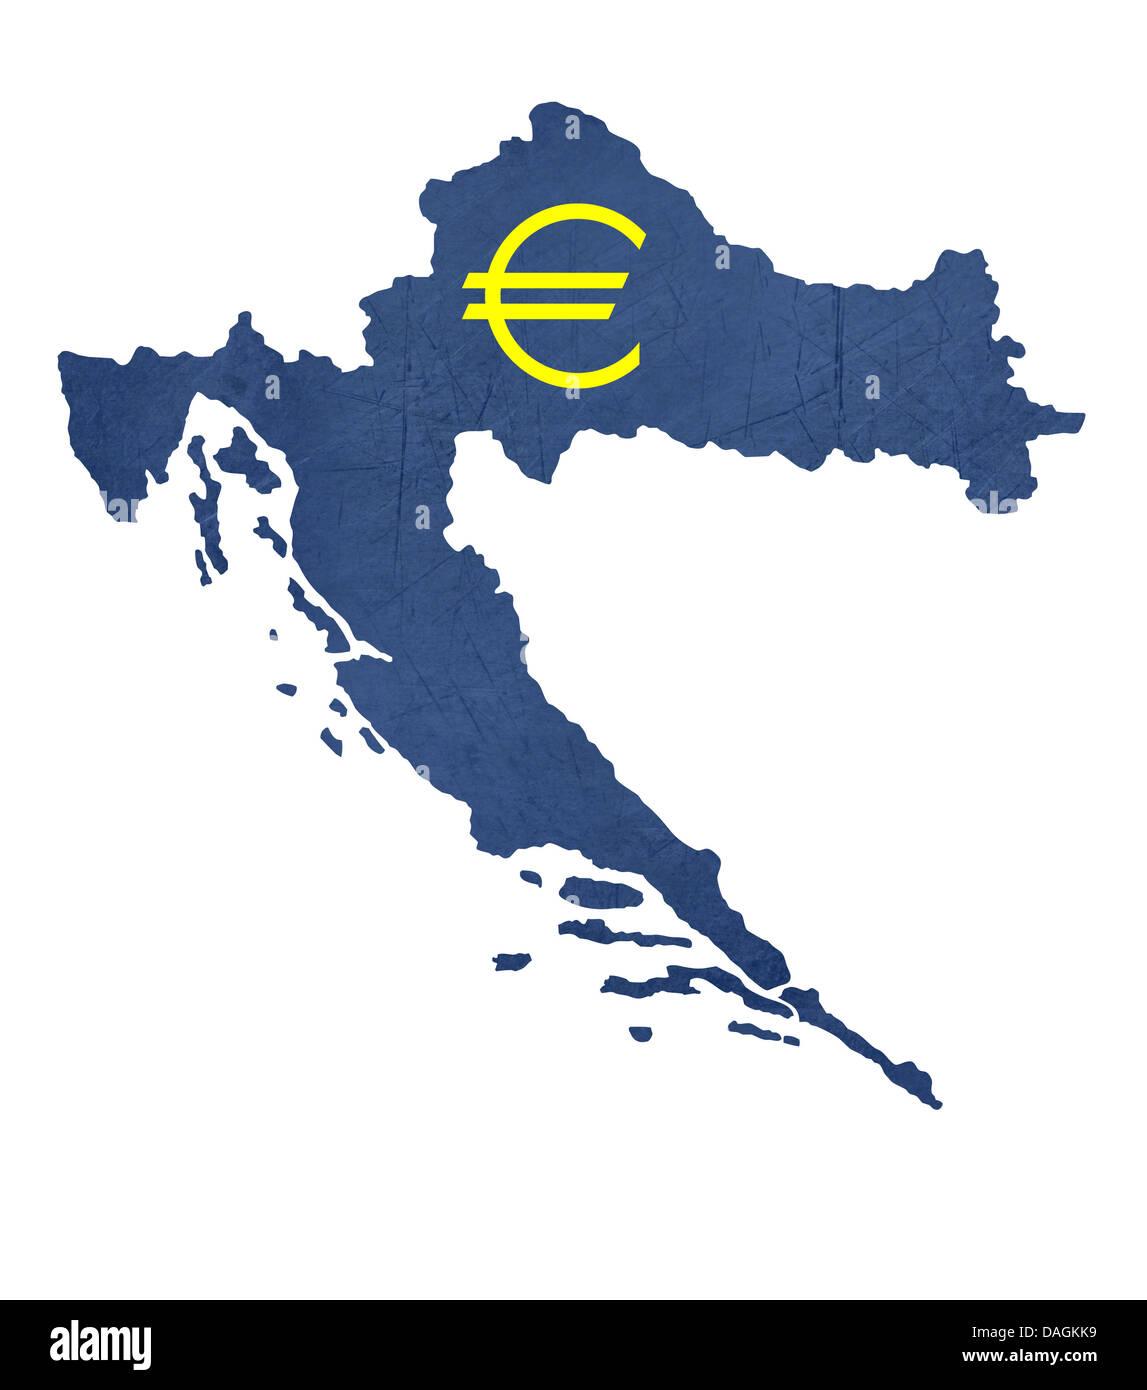 European currency symbol on map of Croatia isolated on white background. Stock Photo